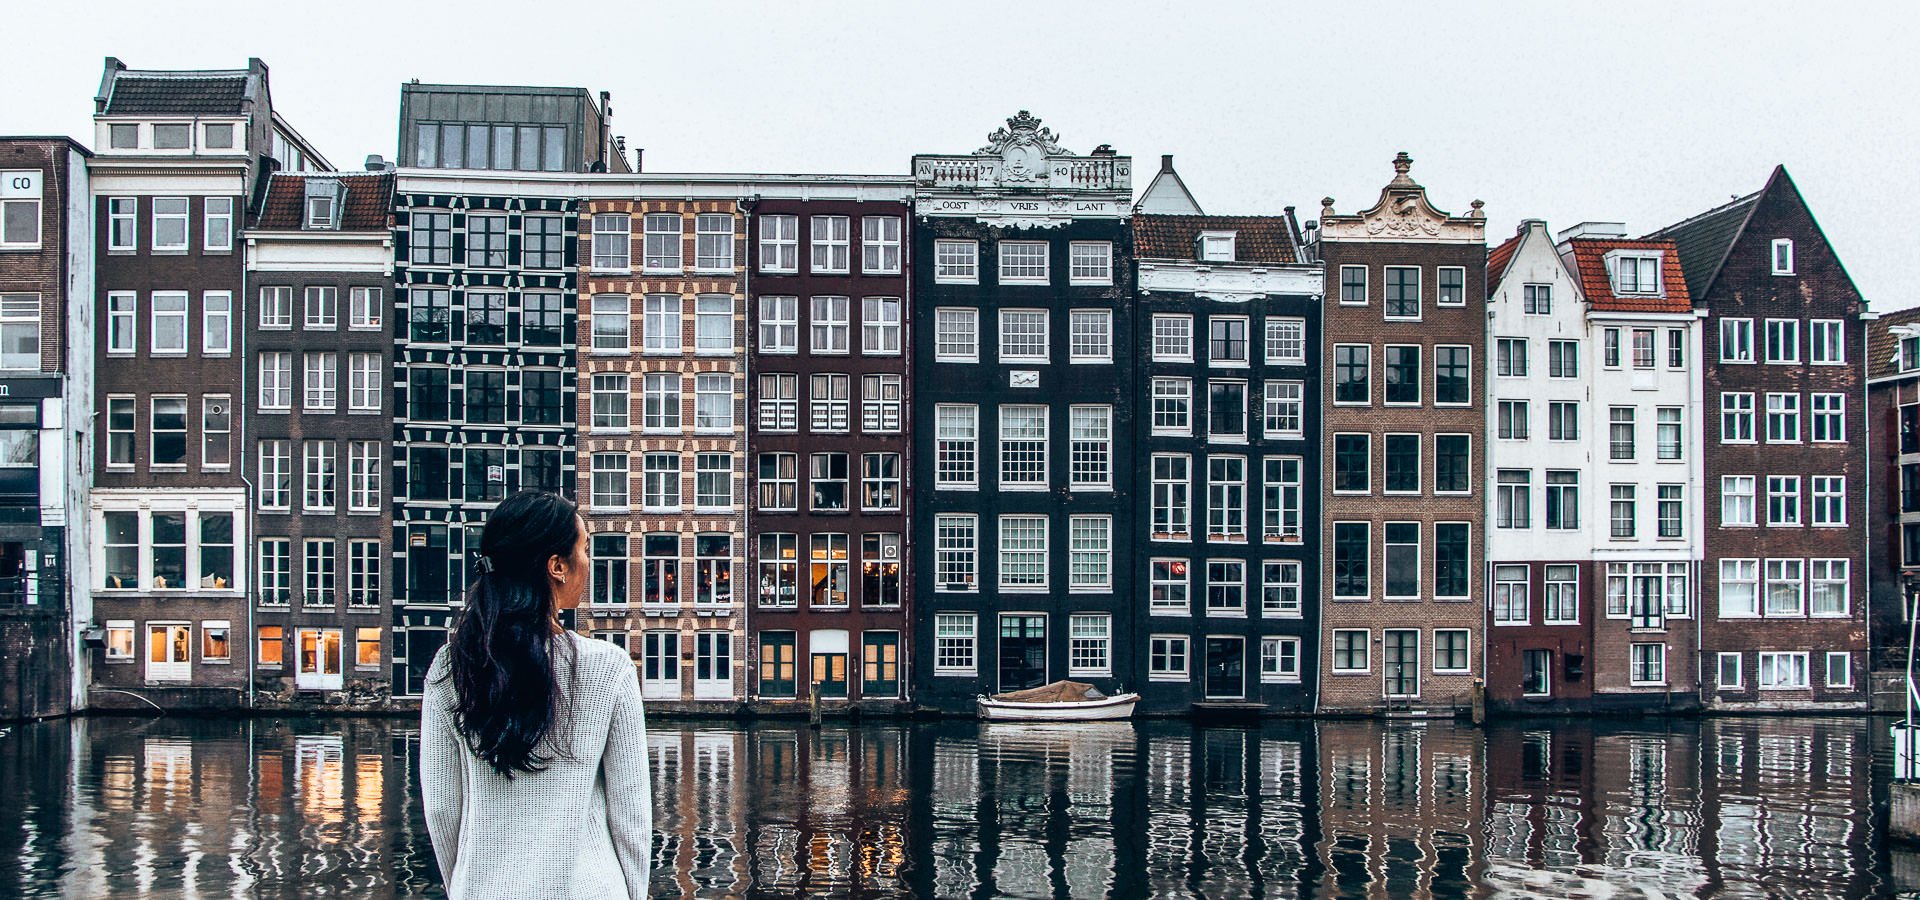 A Non Touristy Weekend Guide To Amsterdam | hidden gems in Europe 2